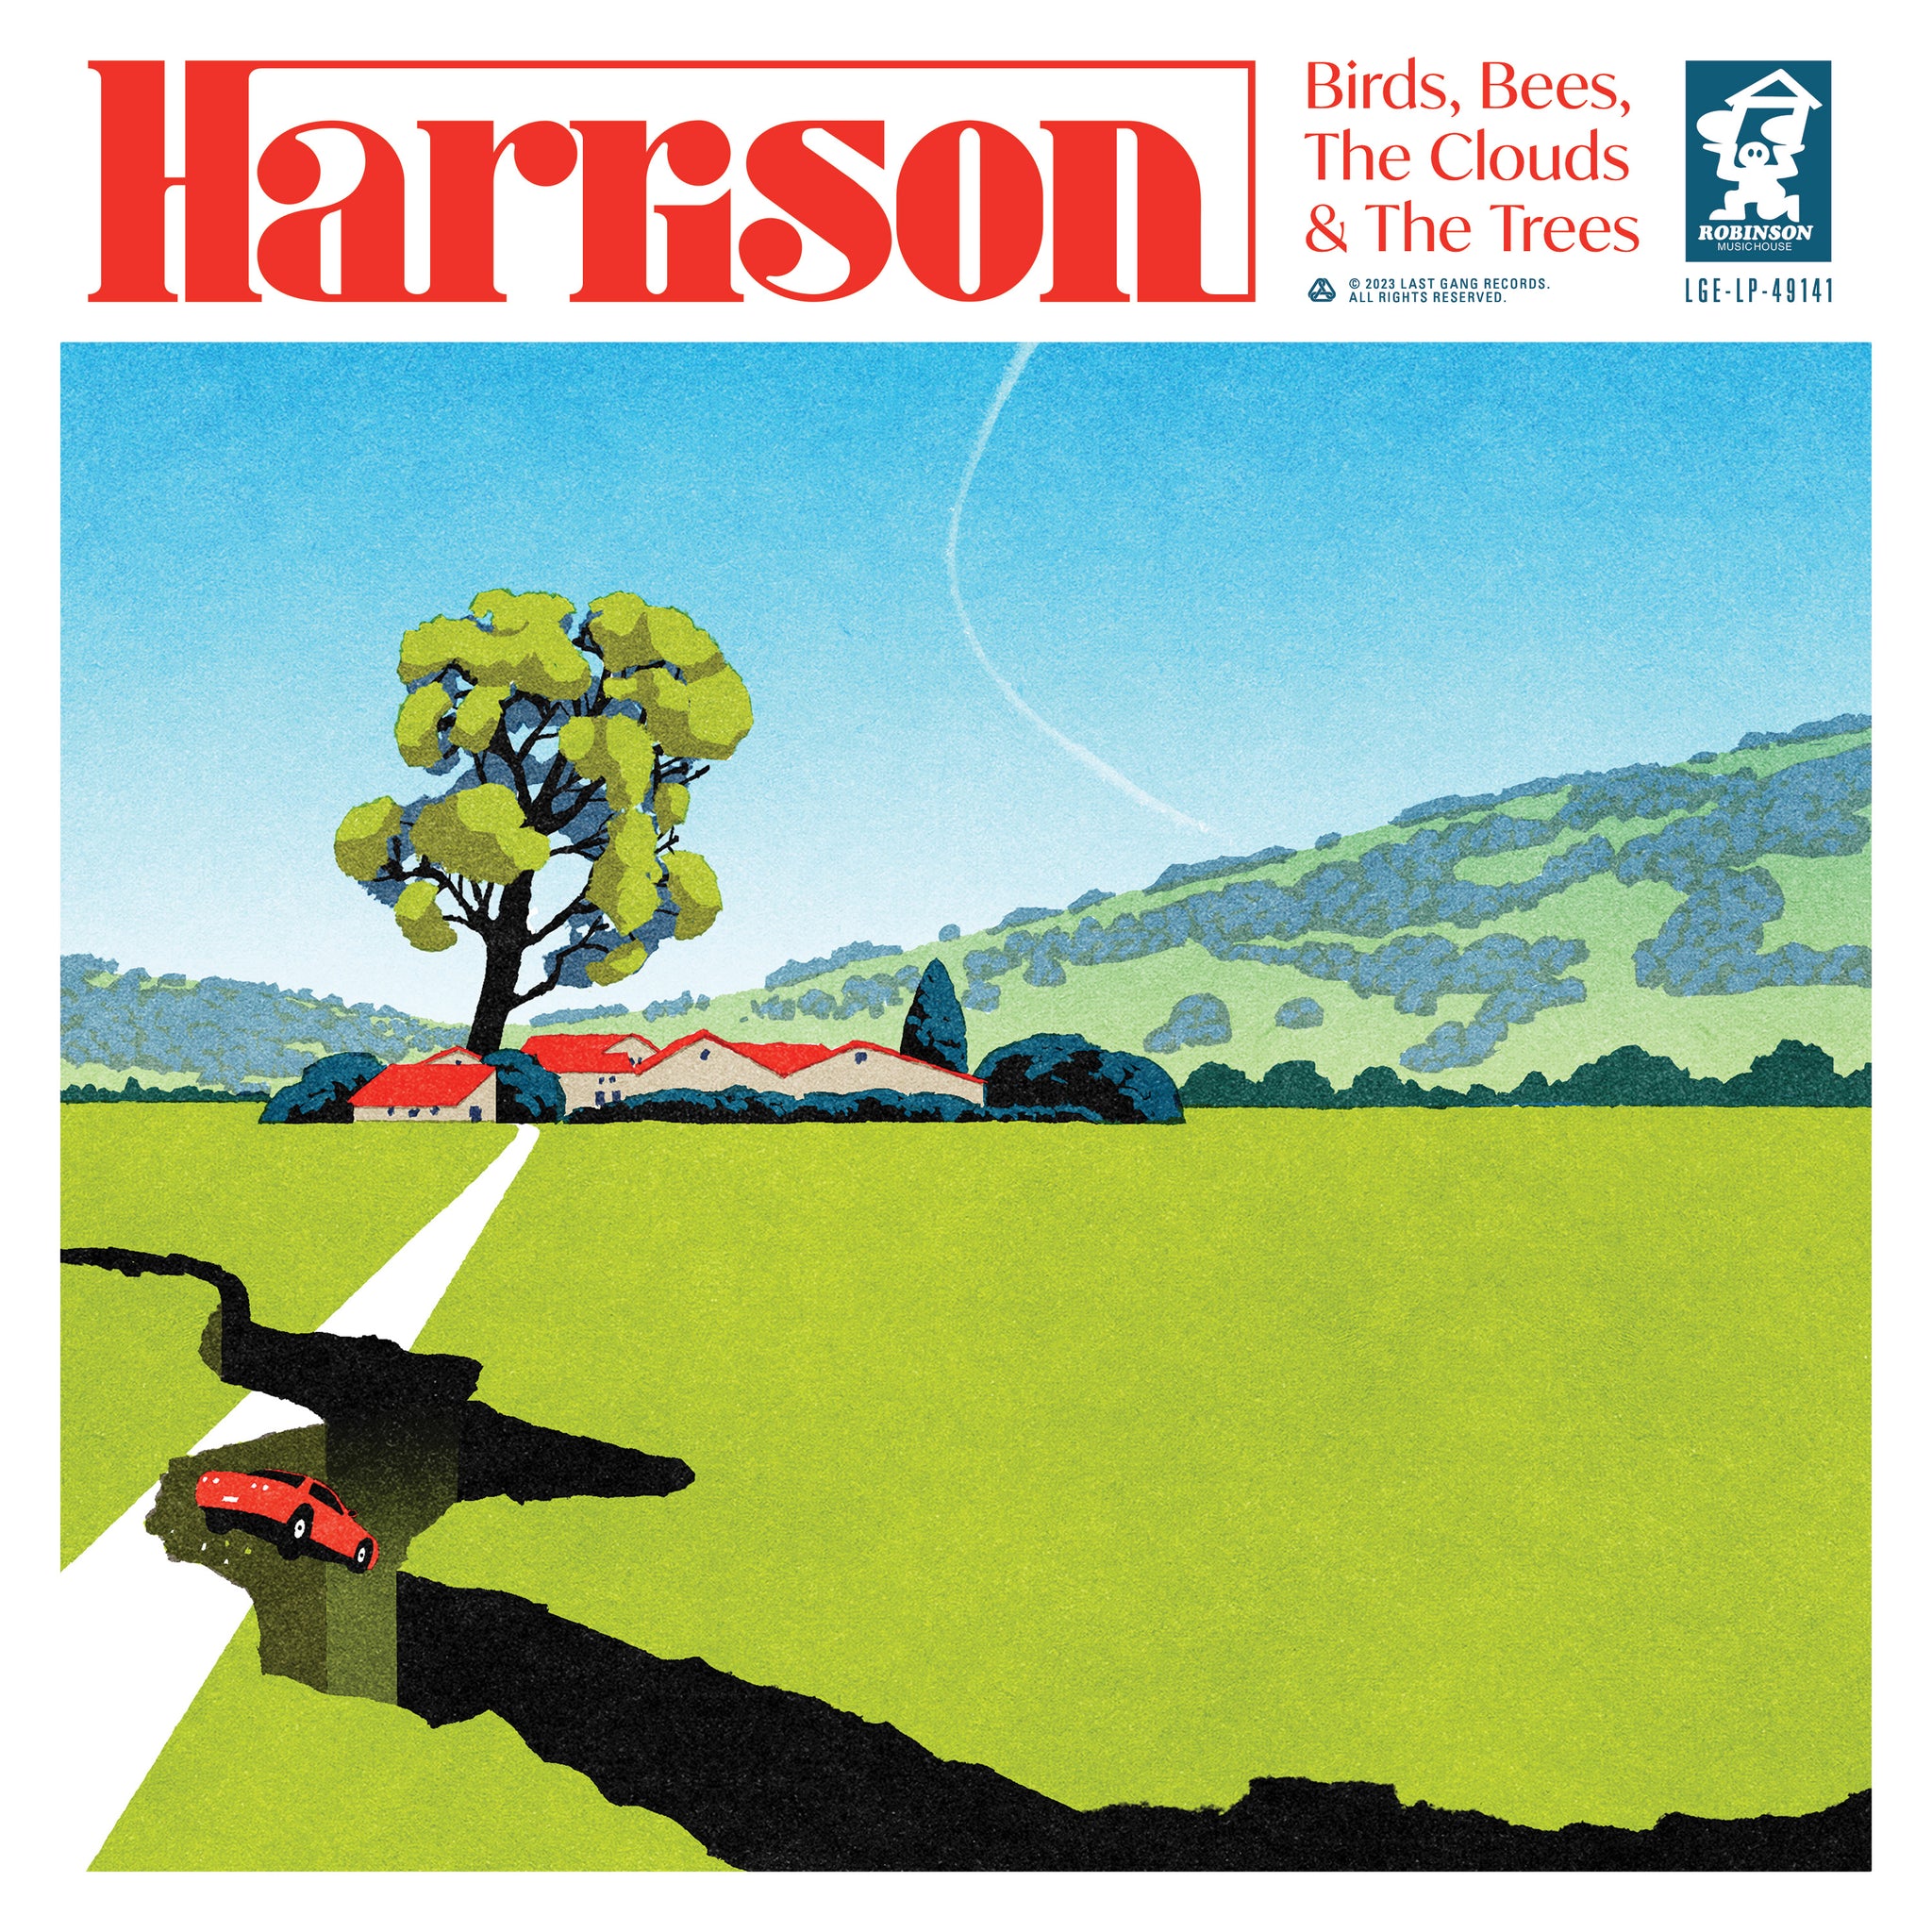 Harrison | Birds, Bees, The Clouds & The Trees – Last Gang Records